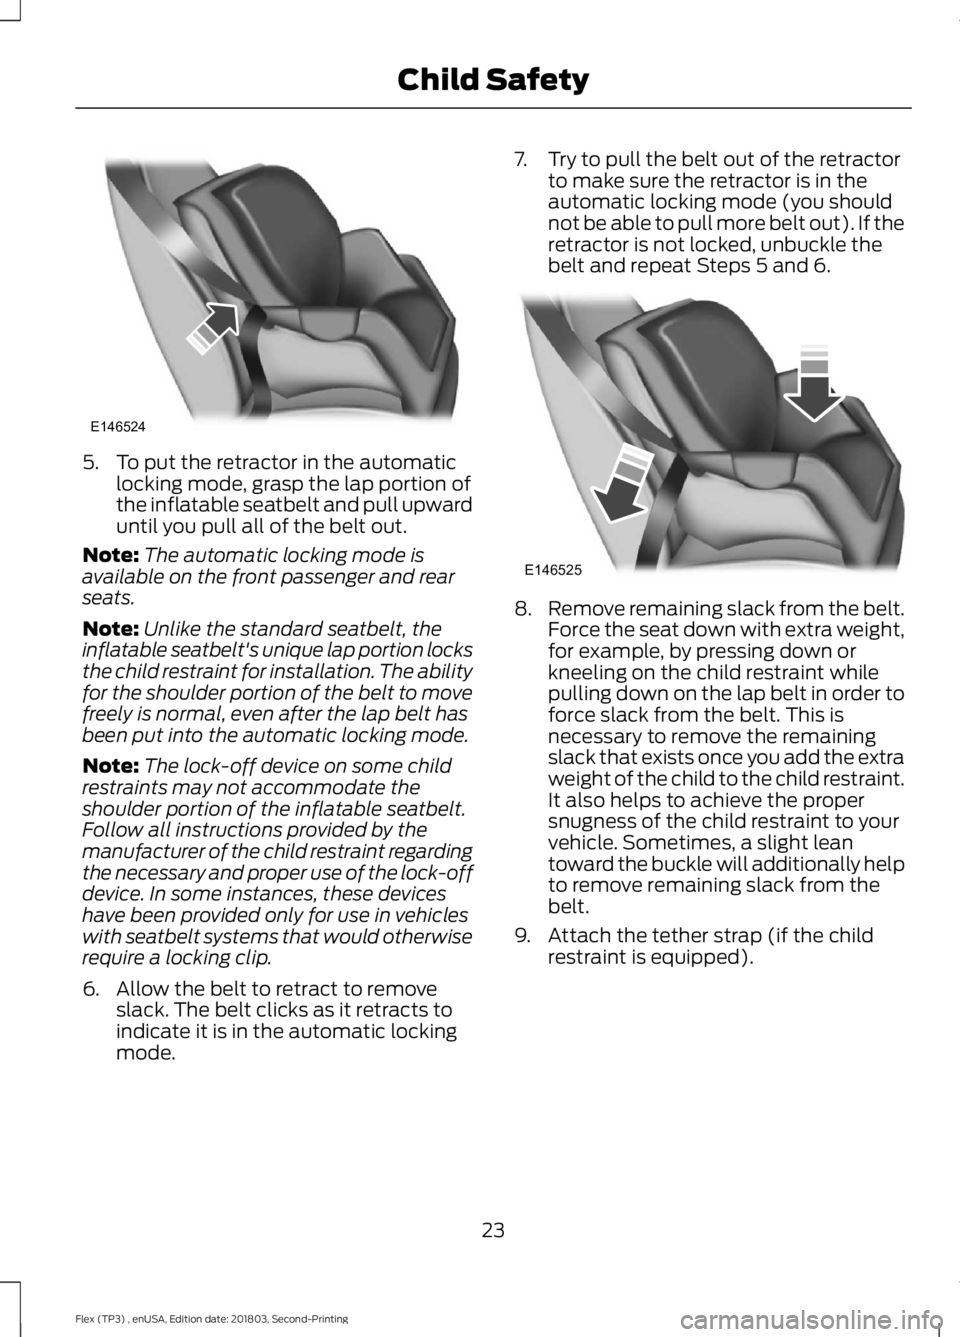 FORD FLEX 2019  Owners Manual 5. To put the retractor in the automatic
locking mode, grasp the lap portion of
the inflatable seatbelt and pull upward
until you pull all of the belt out.
Note: The automatic locking mode is
availabl